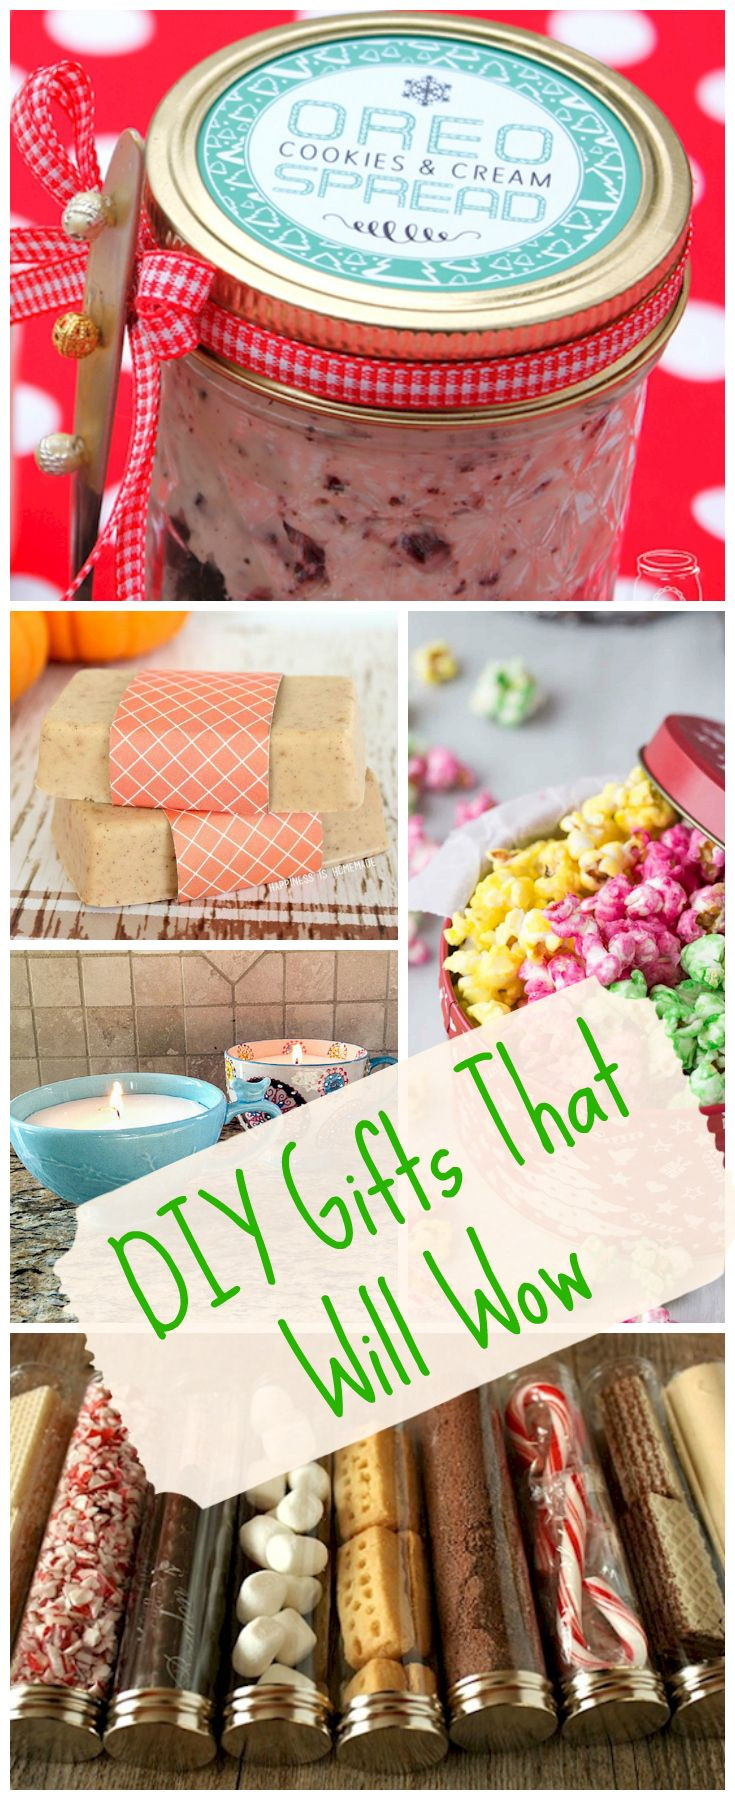 DIY Christmas Gifts For Coworkers
 Best 25 Homemade t baskets ideas on Pinterest